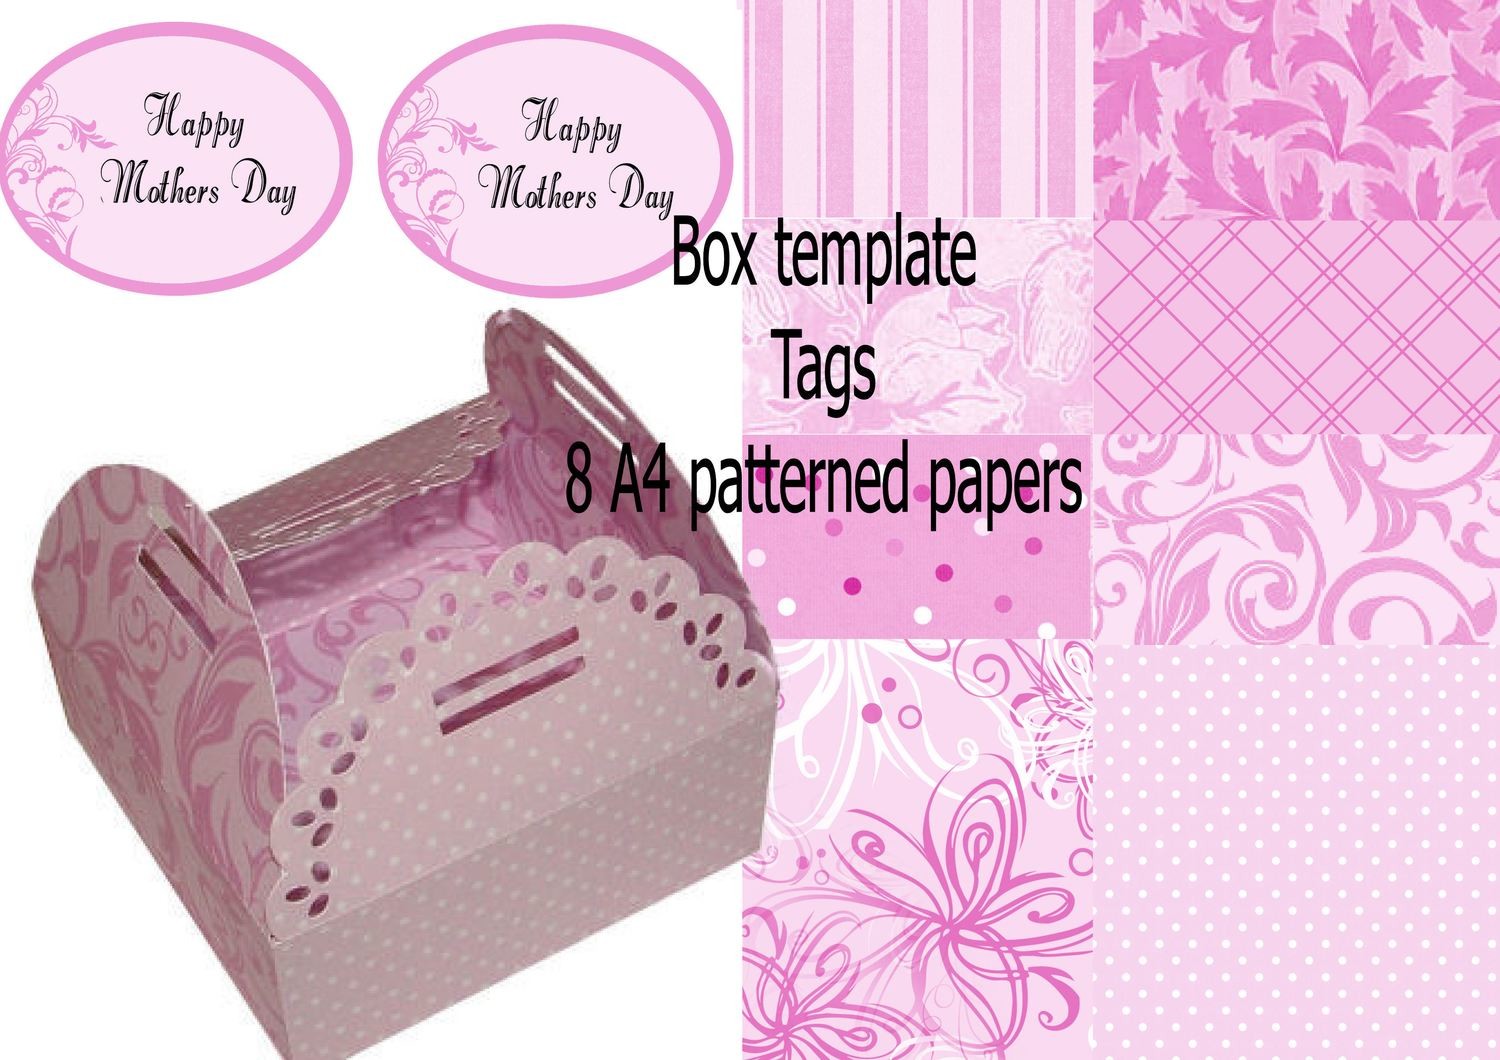 Chocolate box No 1 - inc Mother Mum liners, A4 papers, Print N Cut